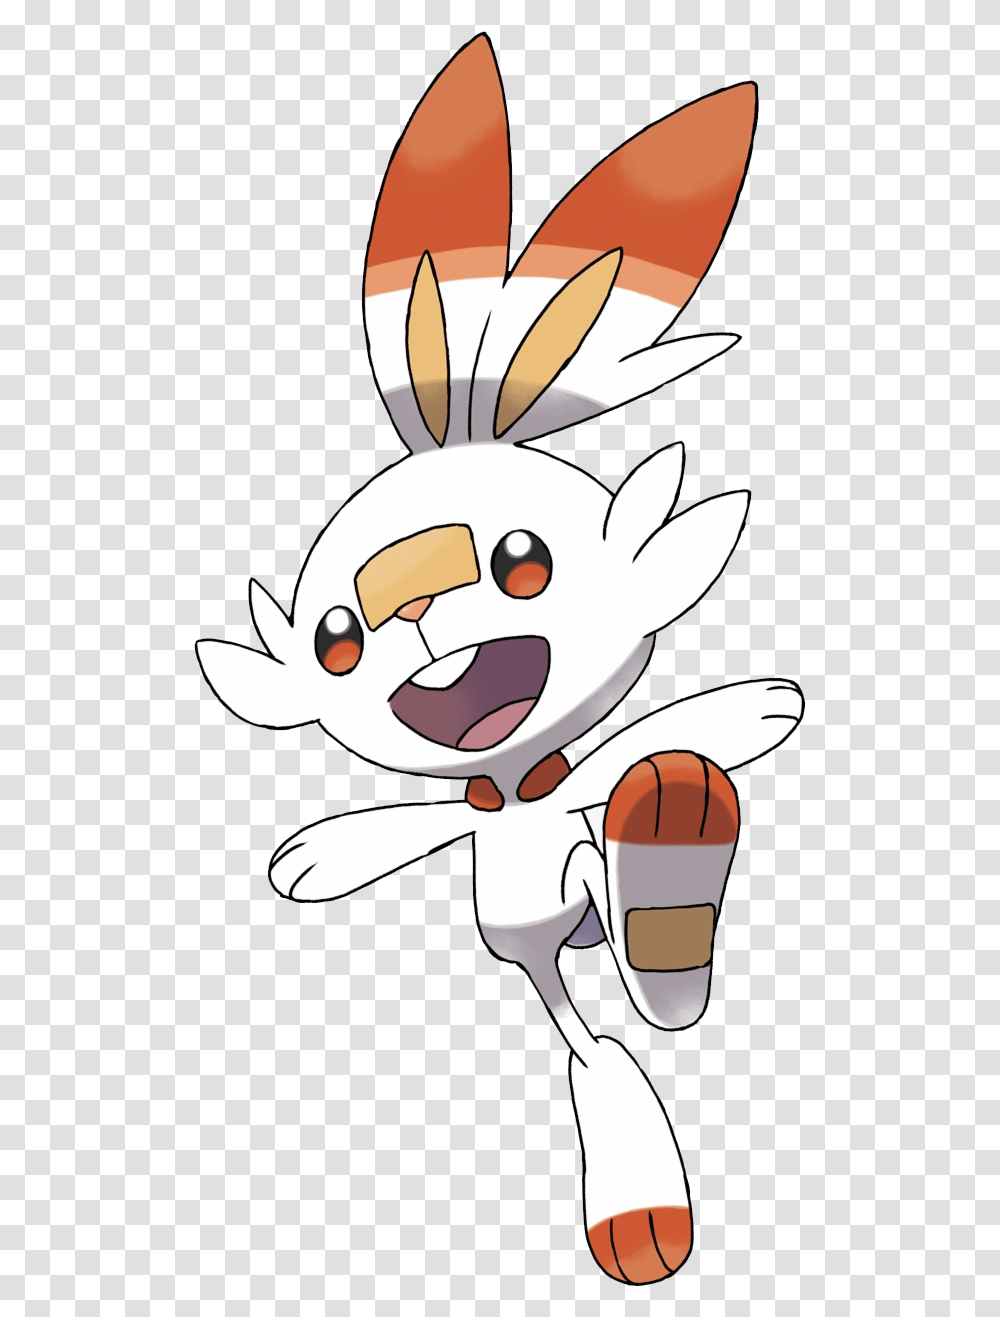 A Red And White Cartoon Bunny Creature Pokemon Scorbunny, Grain, Plant, Animal, Seed Transparent Png